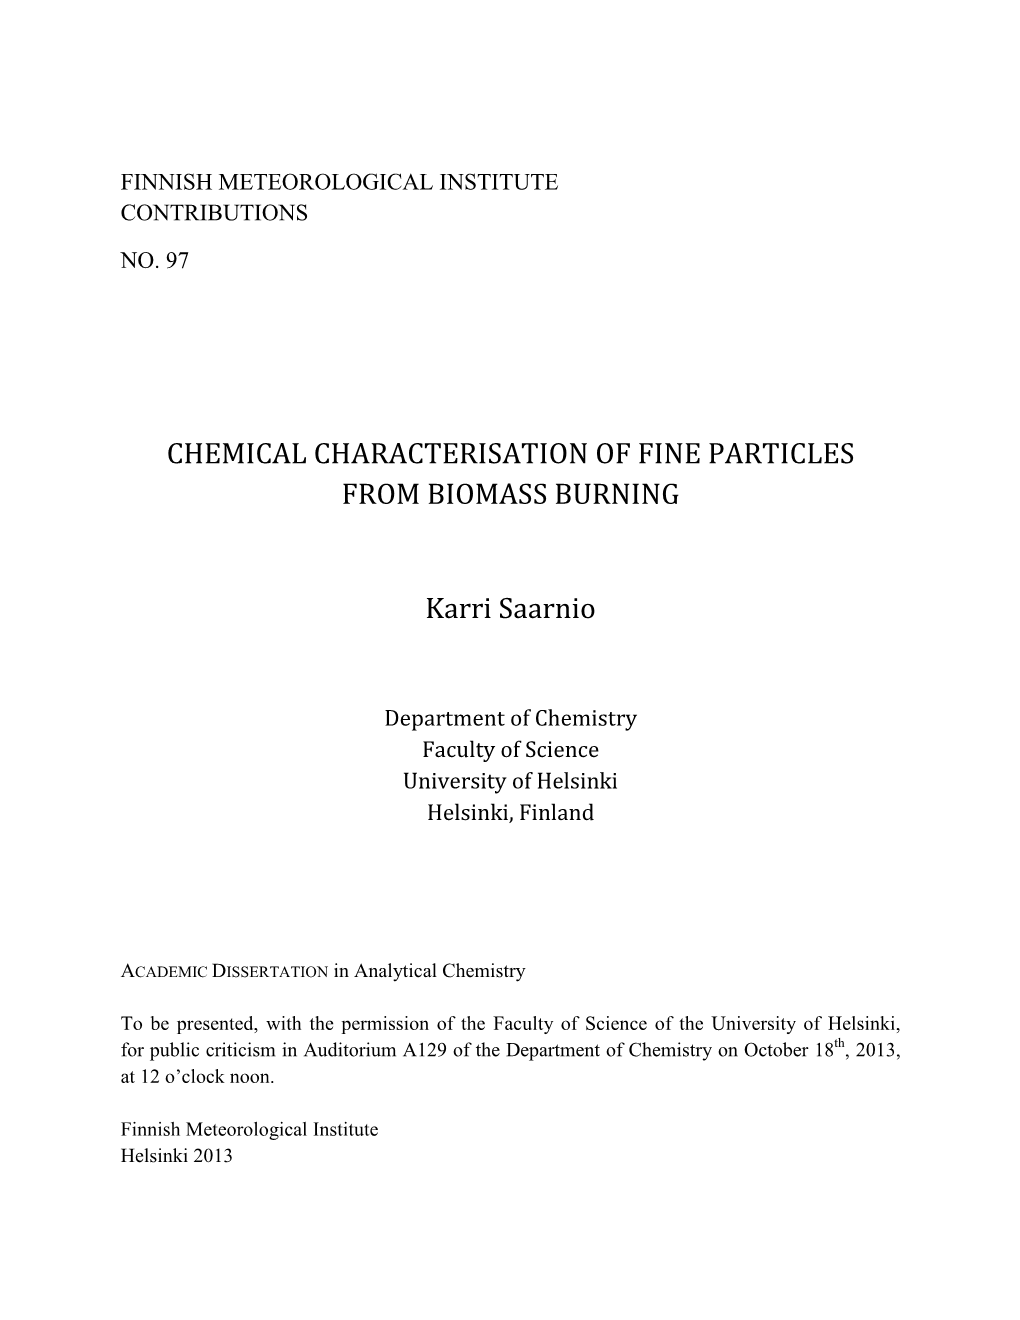 Chemical Characterisation of Fine Particles from Biomass Burning